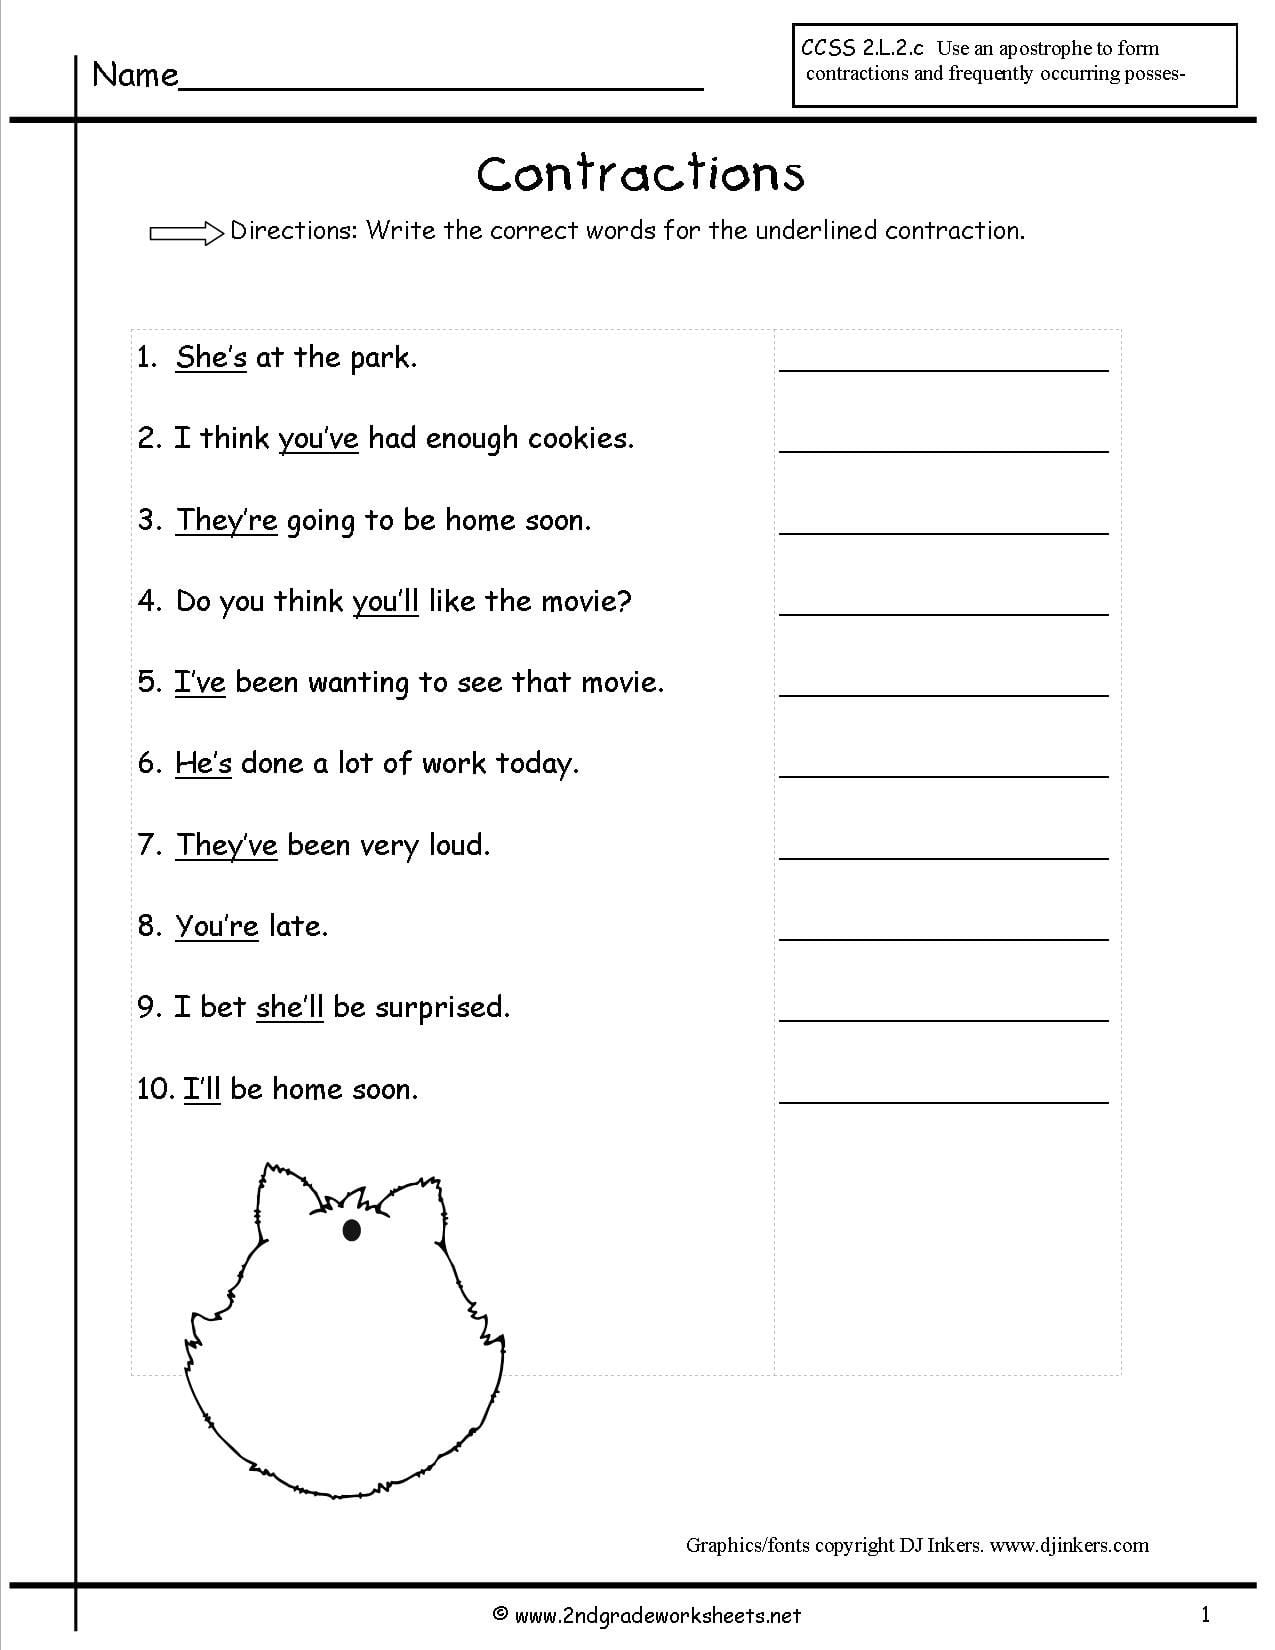 Free Contractions Worksheets And Printouts Also Free Contraction Worksheets